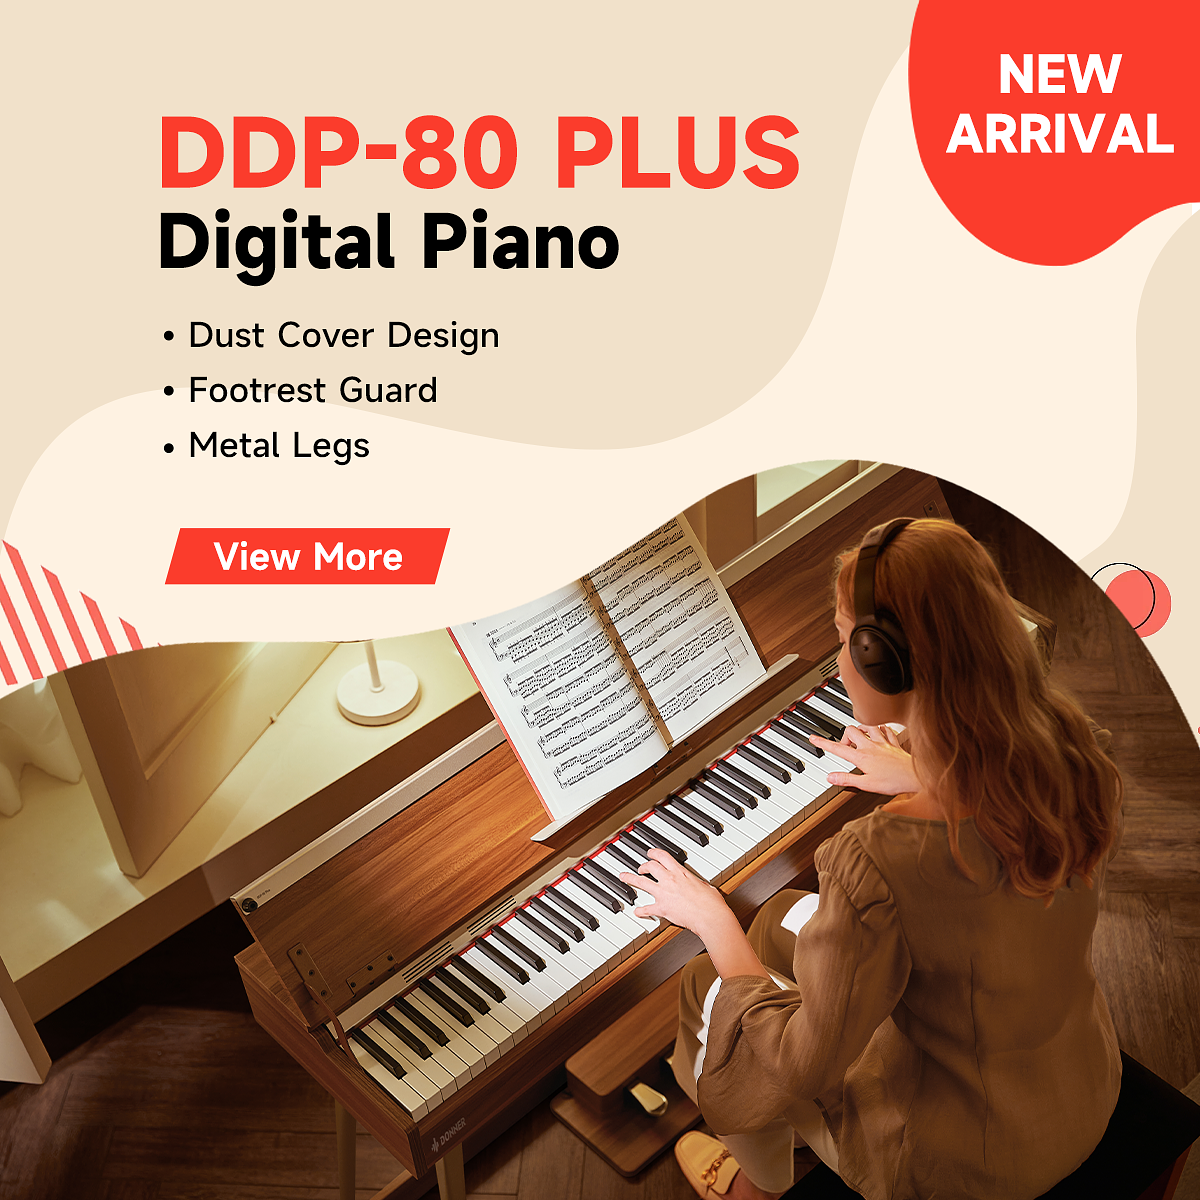  Donner DDP-80 Digital Piano 88 Key Weighted Keyboard